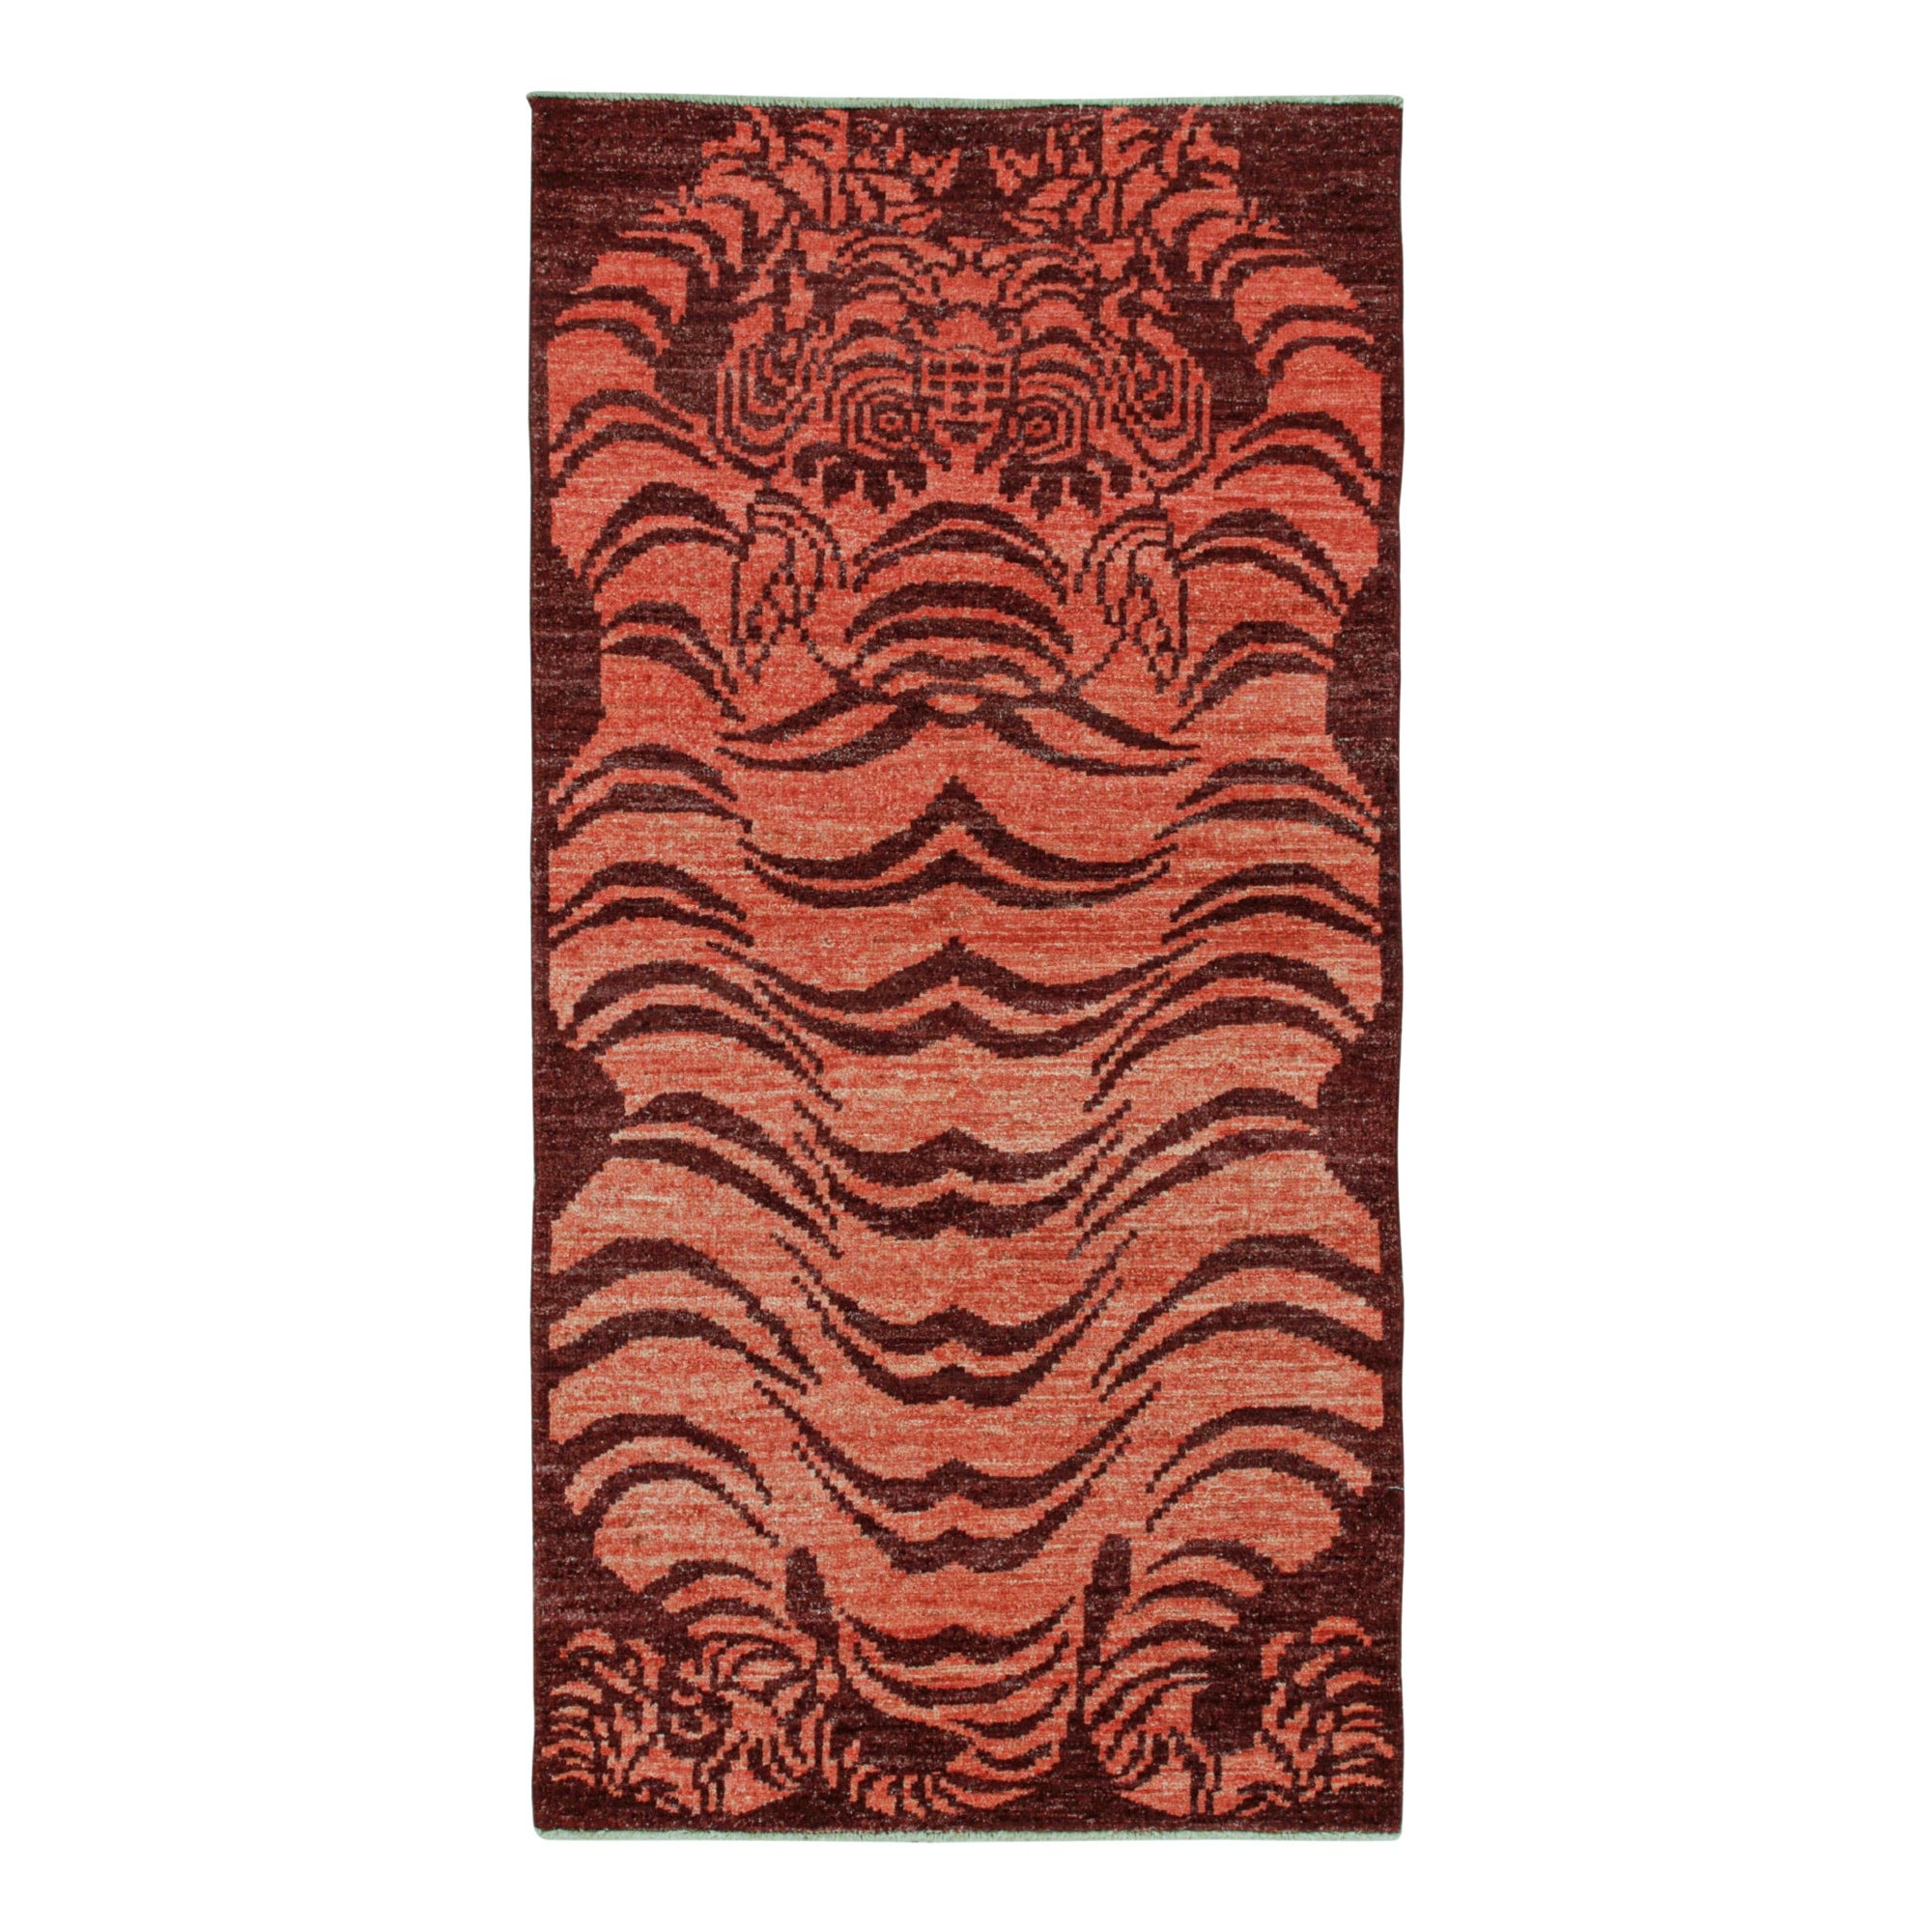 Rug & Kilim’s Classic Style Tiger Runner in Orange and Red Pictorial For Sale